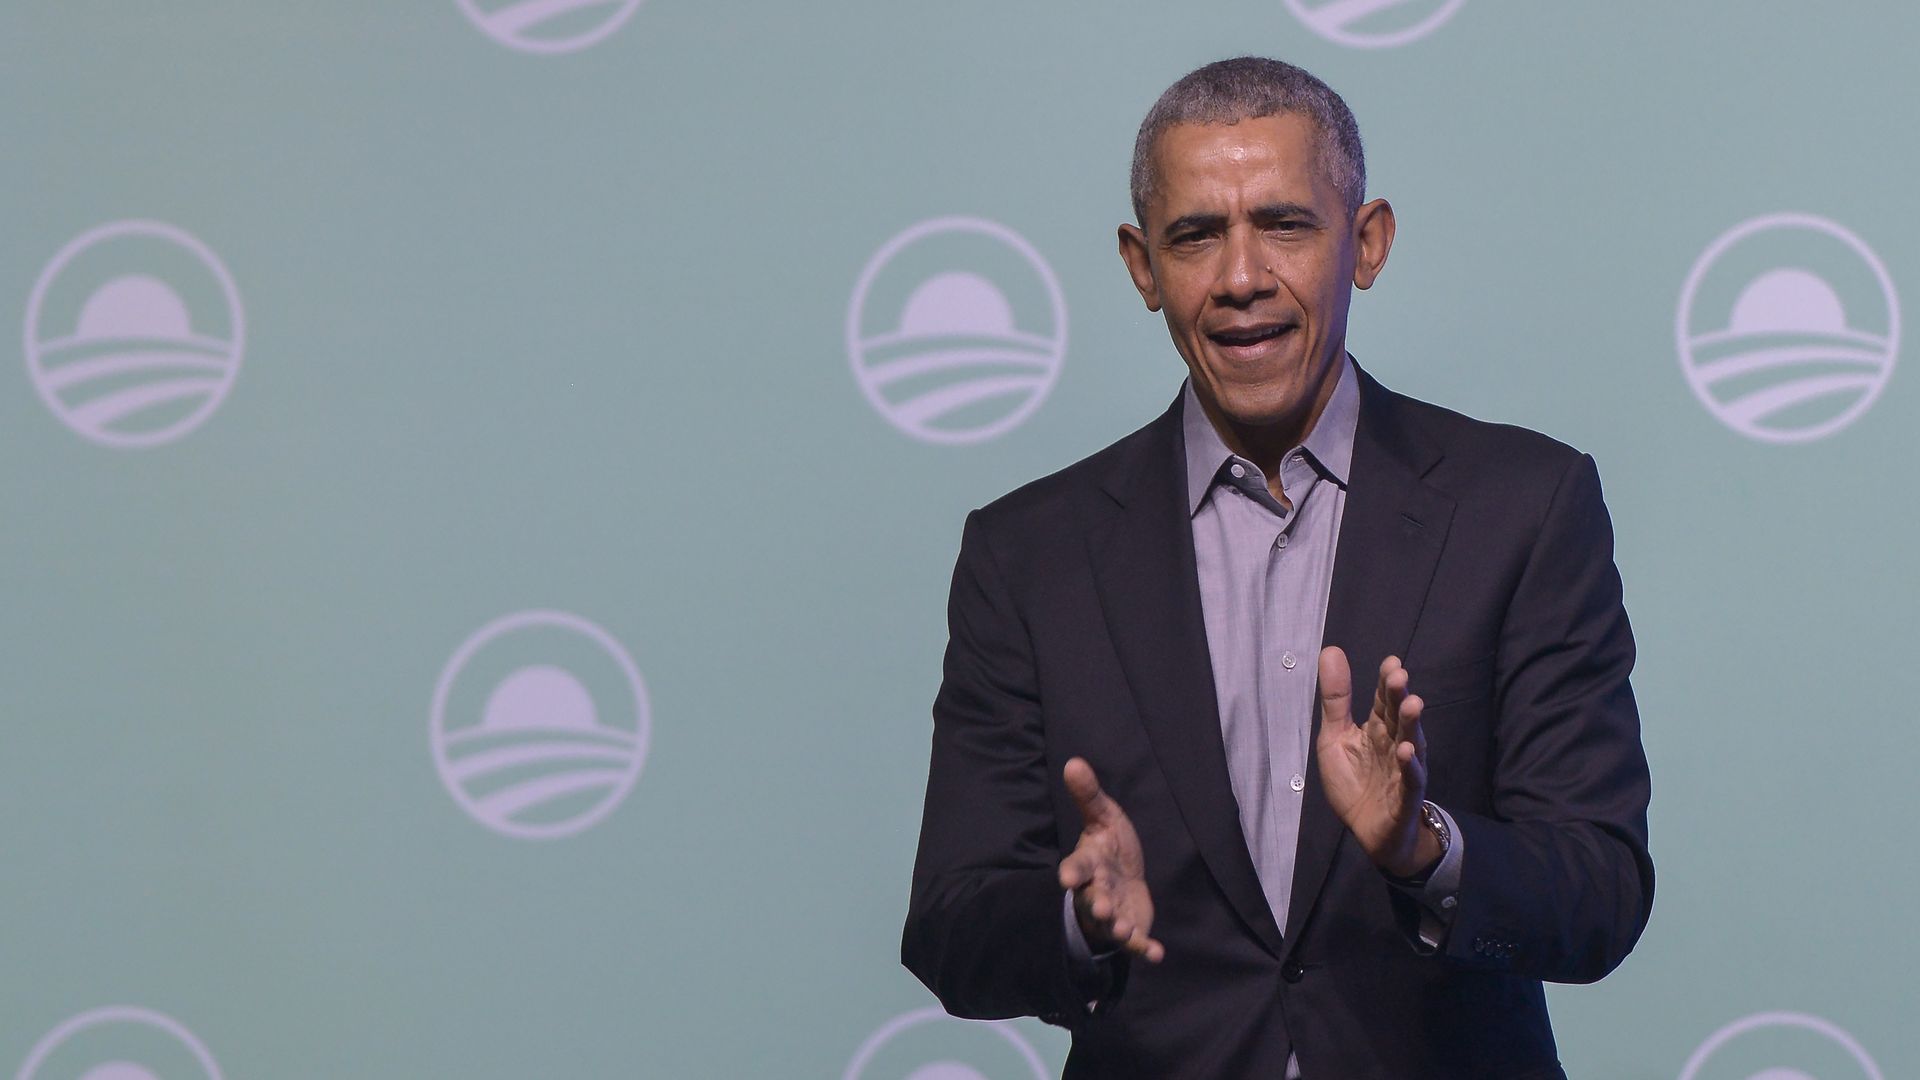 President Barack Obama gesture on the stage as he attends an Obama Foundation event in Kuala Lumpur, Malaysia, 13 December 2019. 